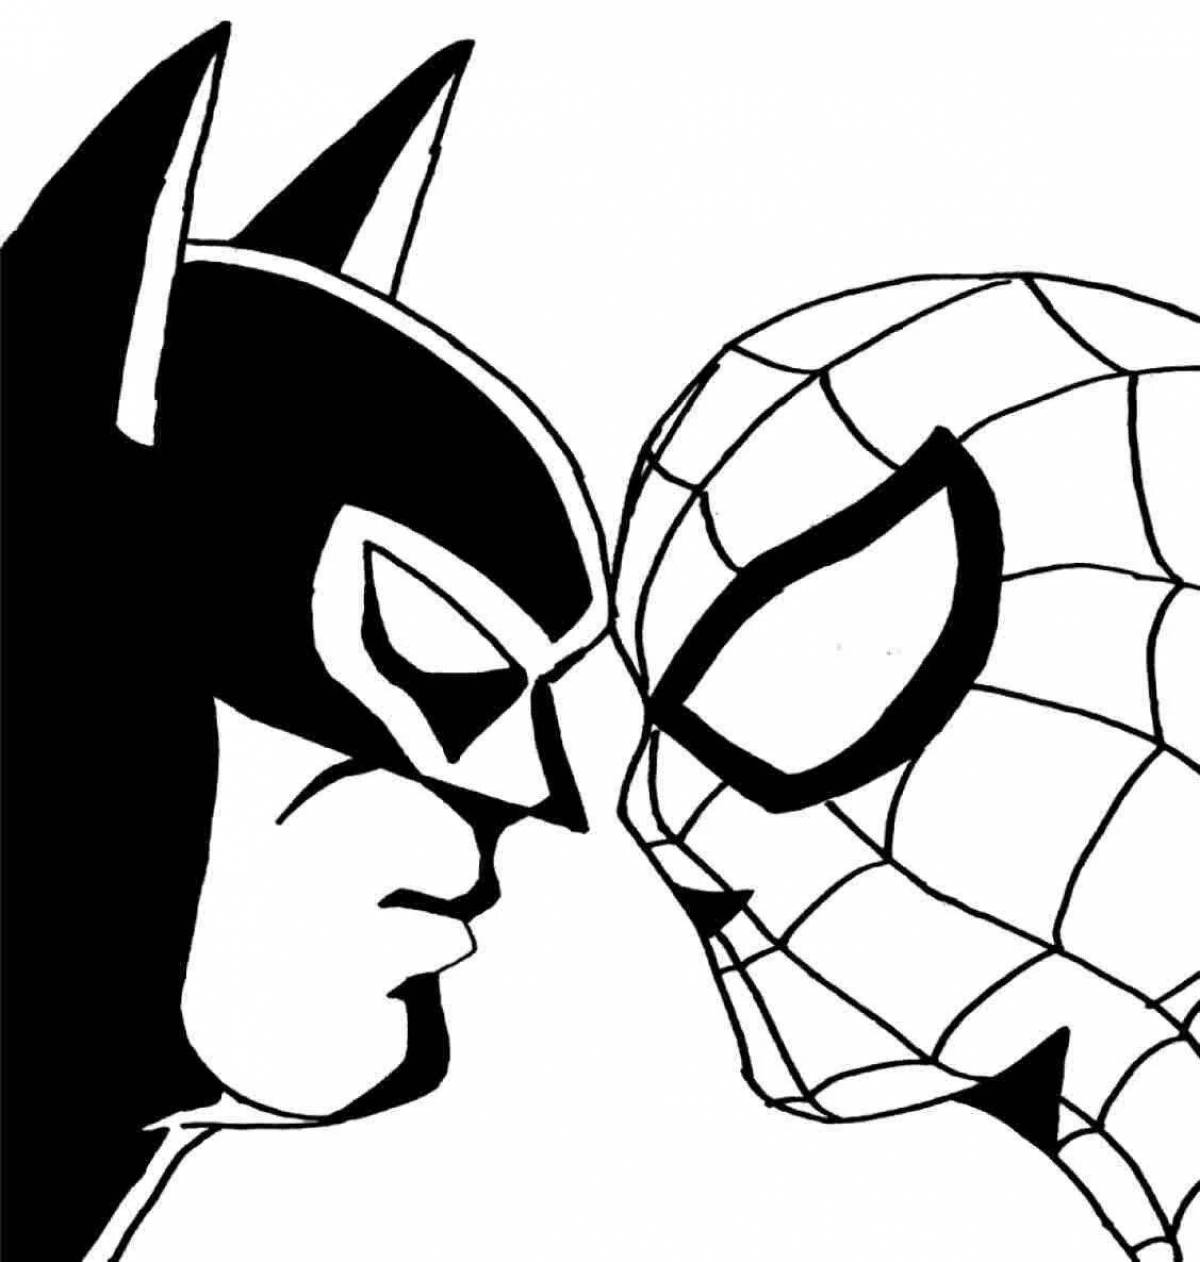 Great batman and spiderman coloring page